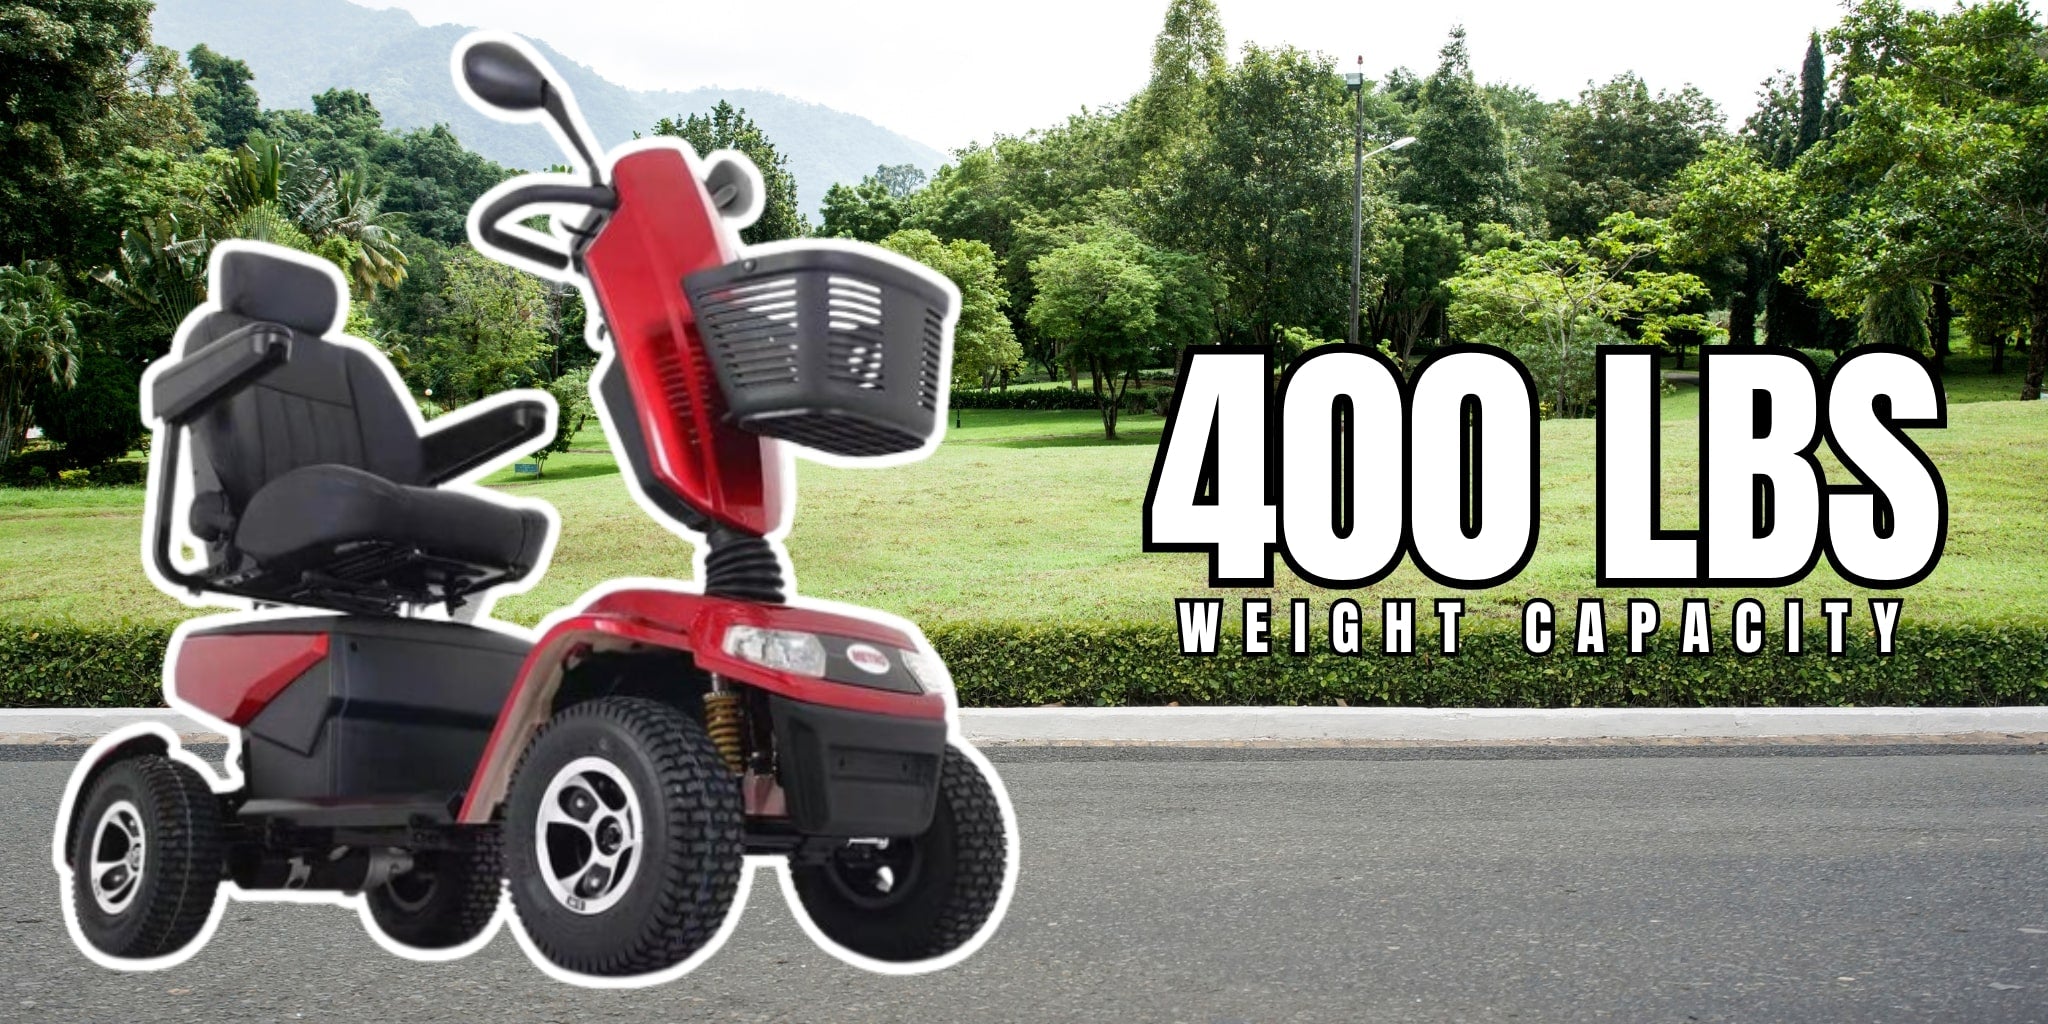 S800 heavy-duty mobility scooter